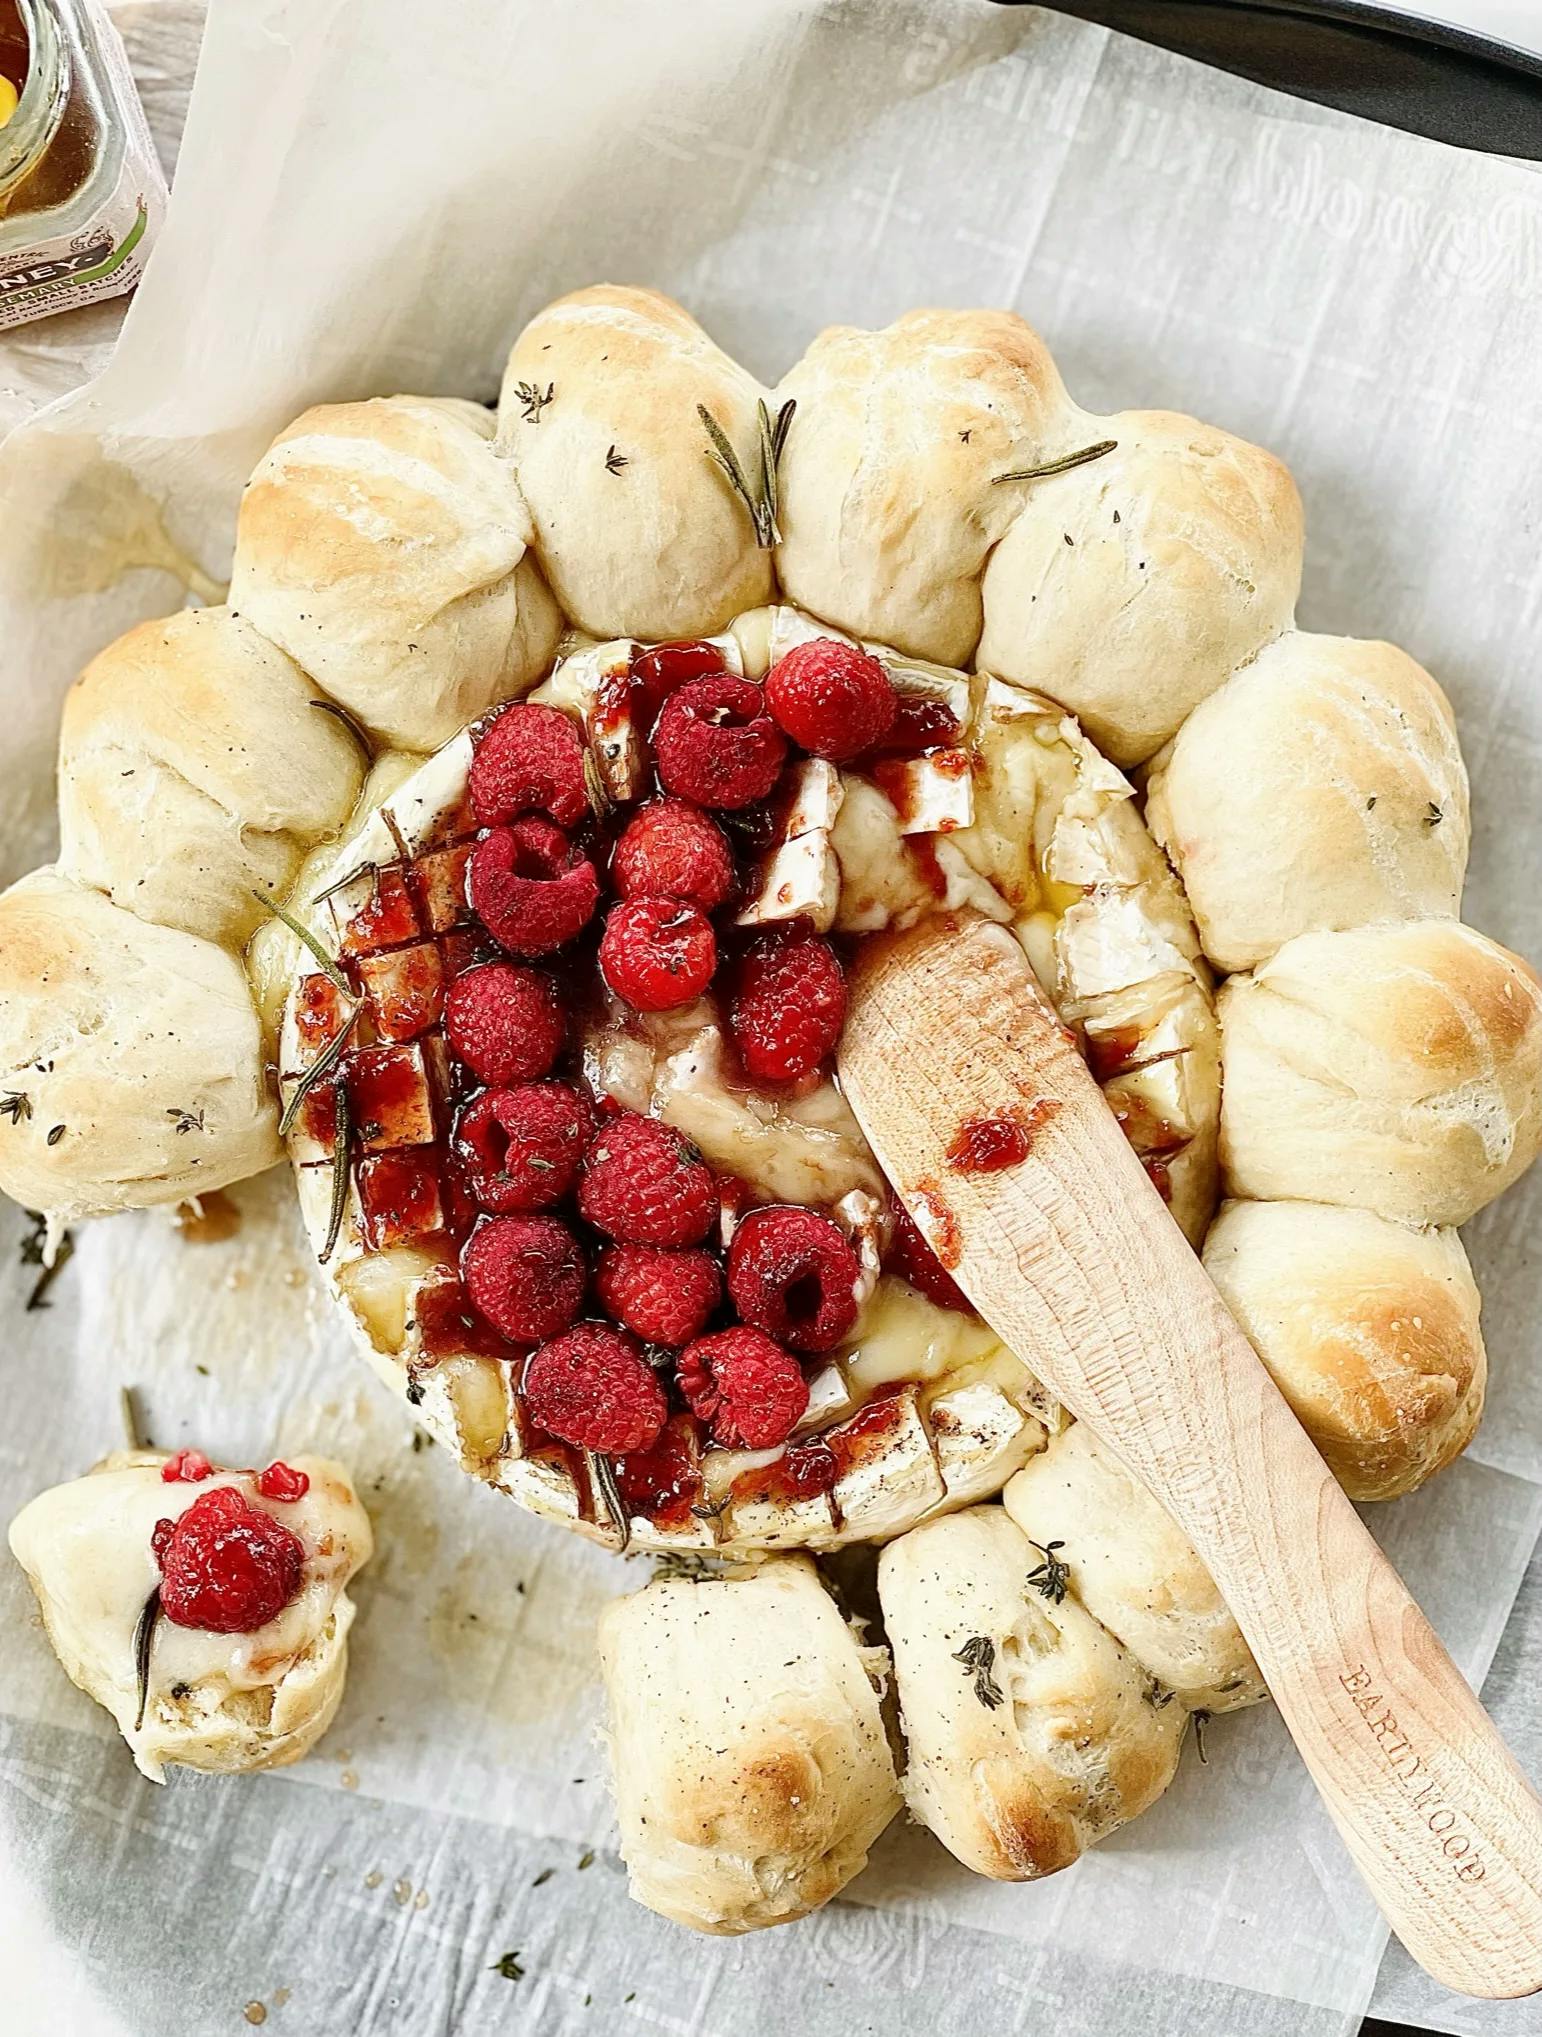 Picture for Berries & Baked Brie Wreath